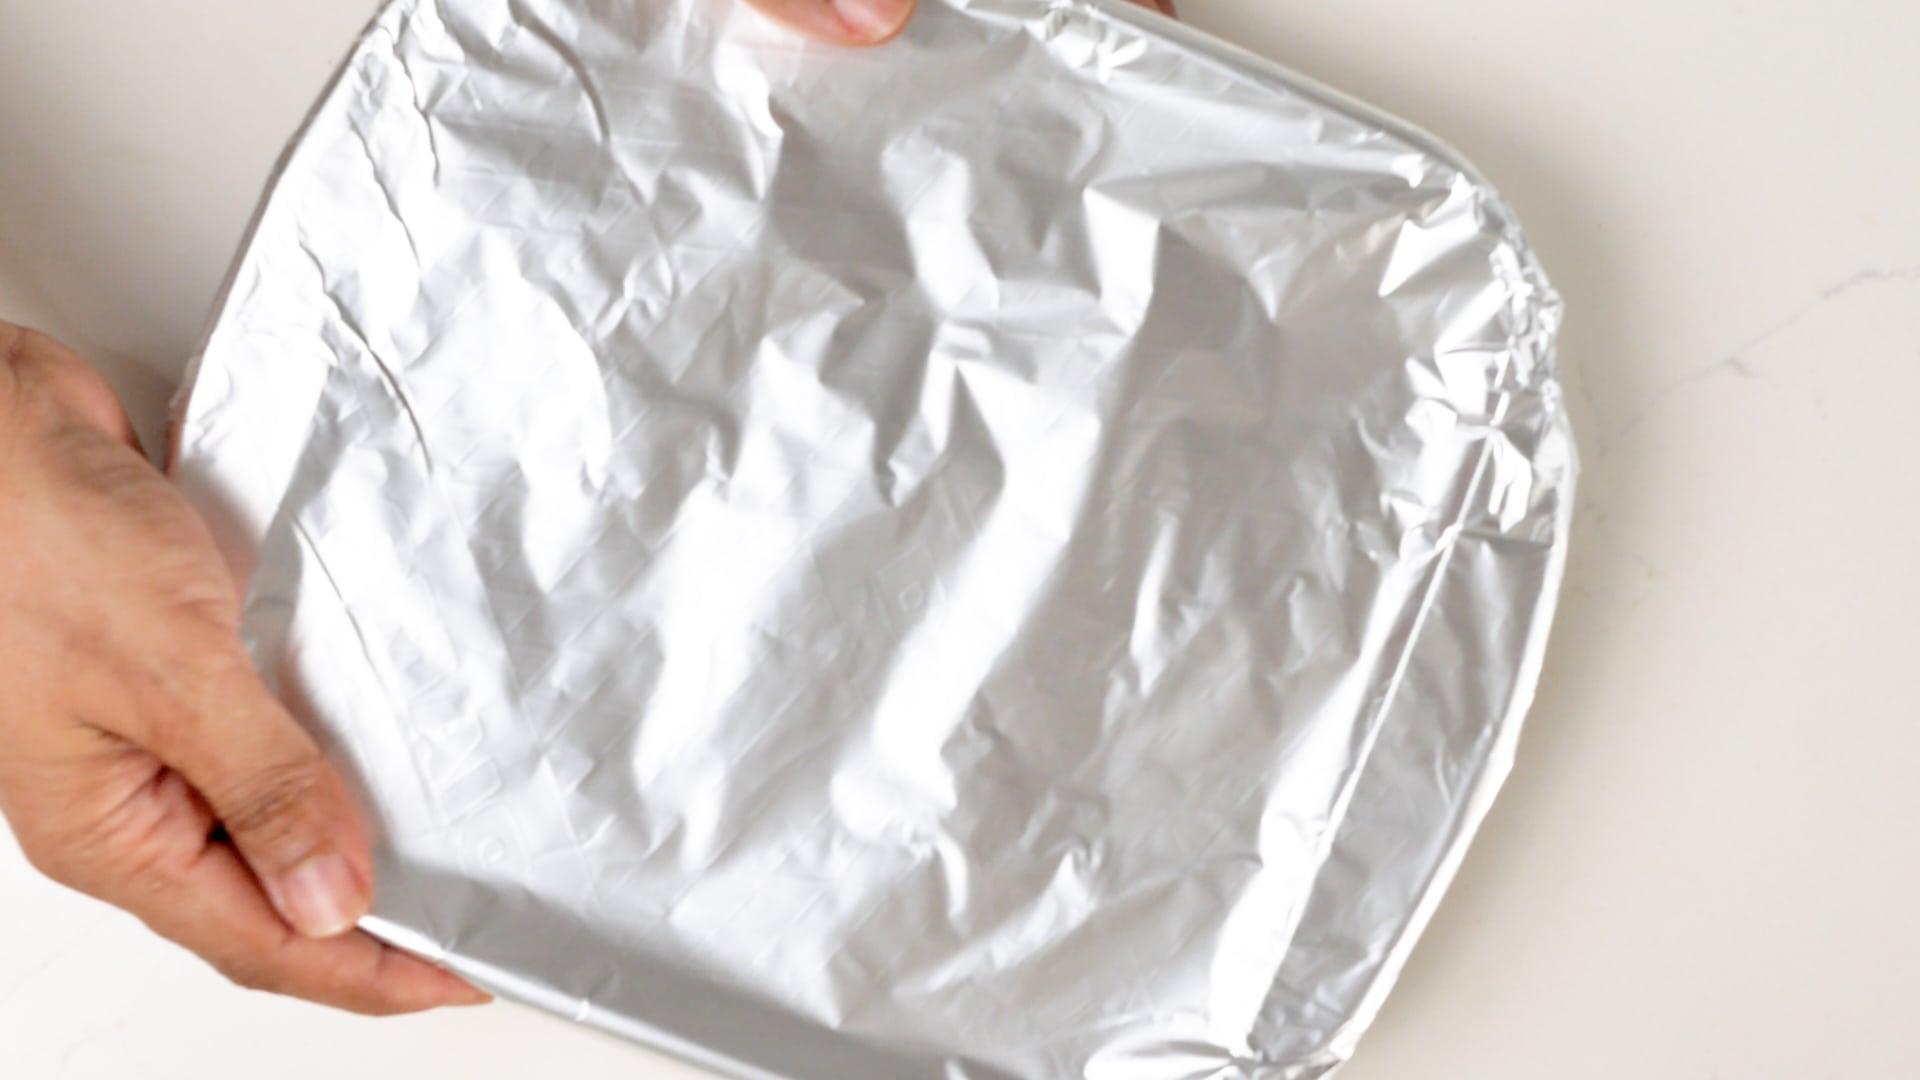 Covering with foil